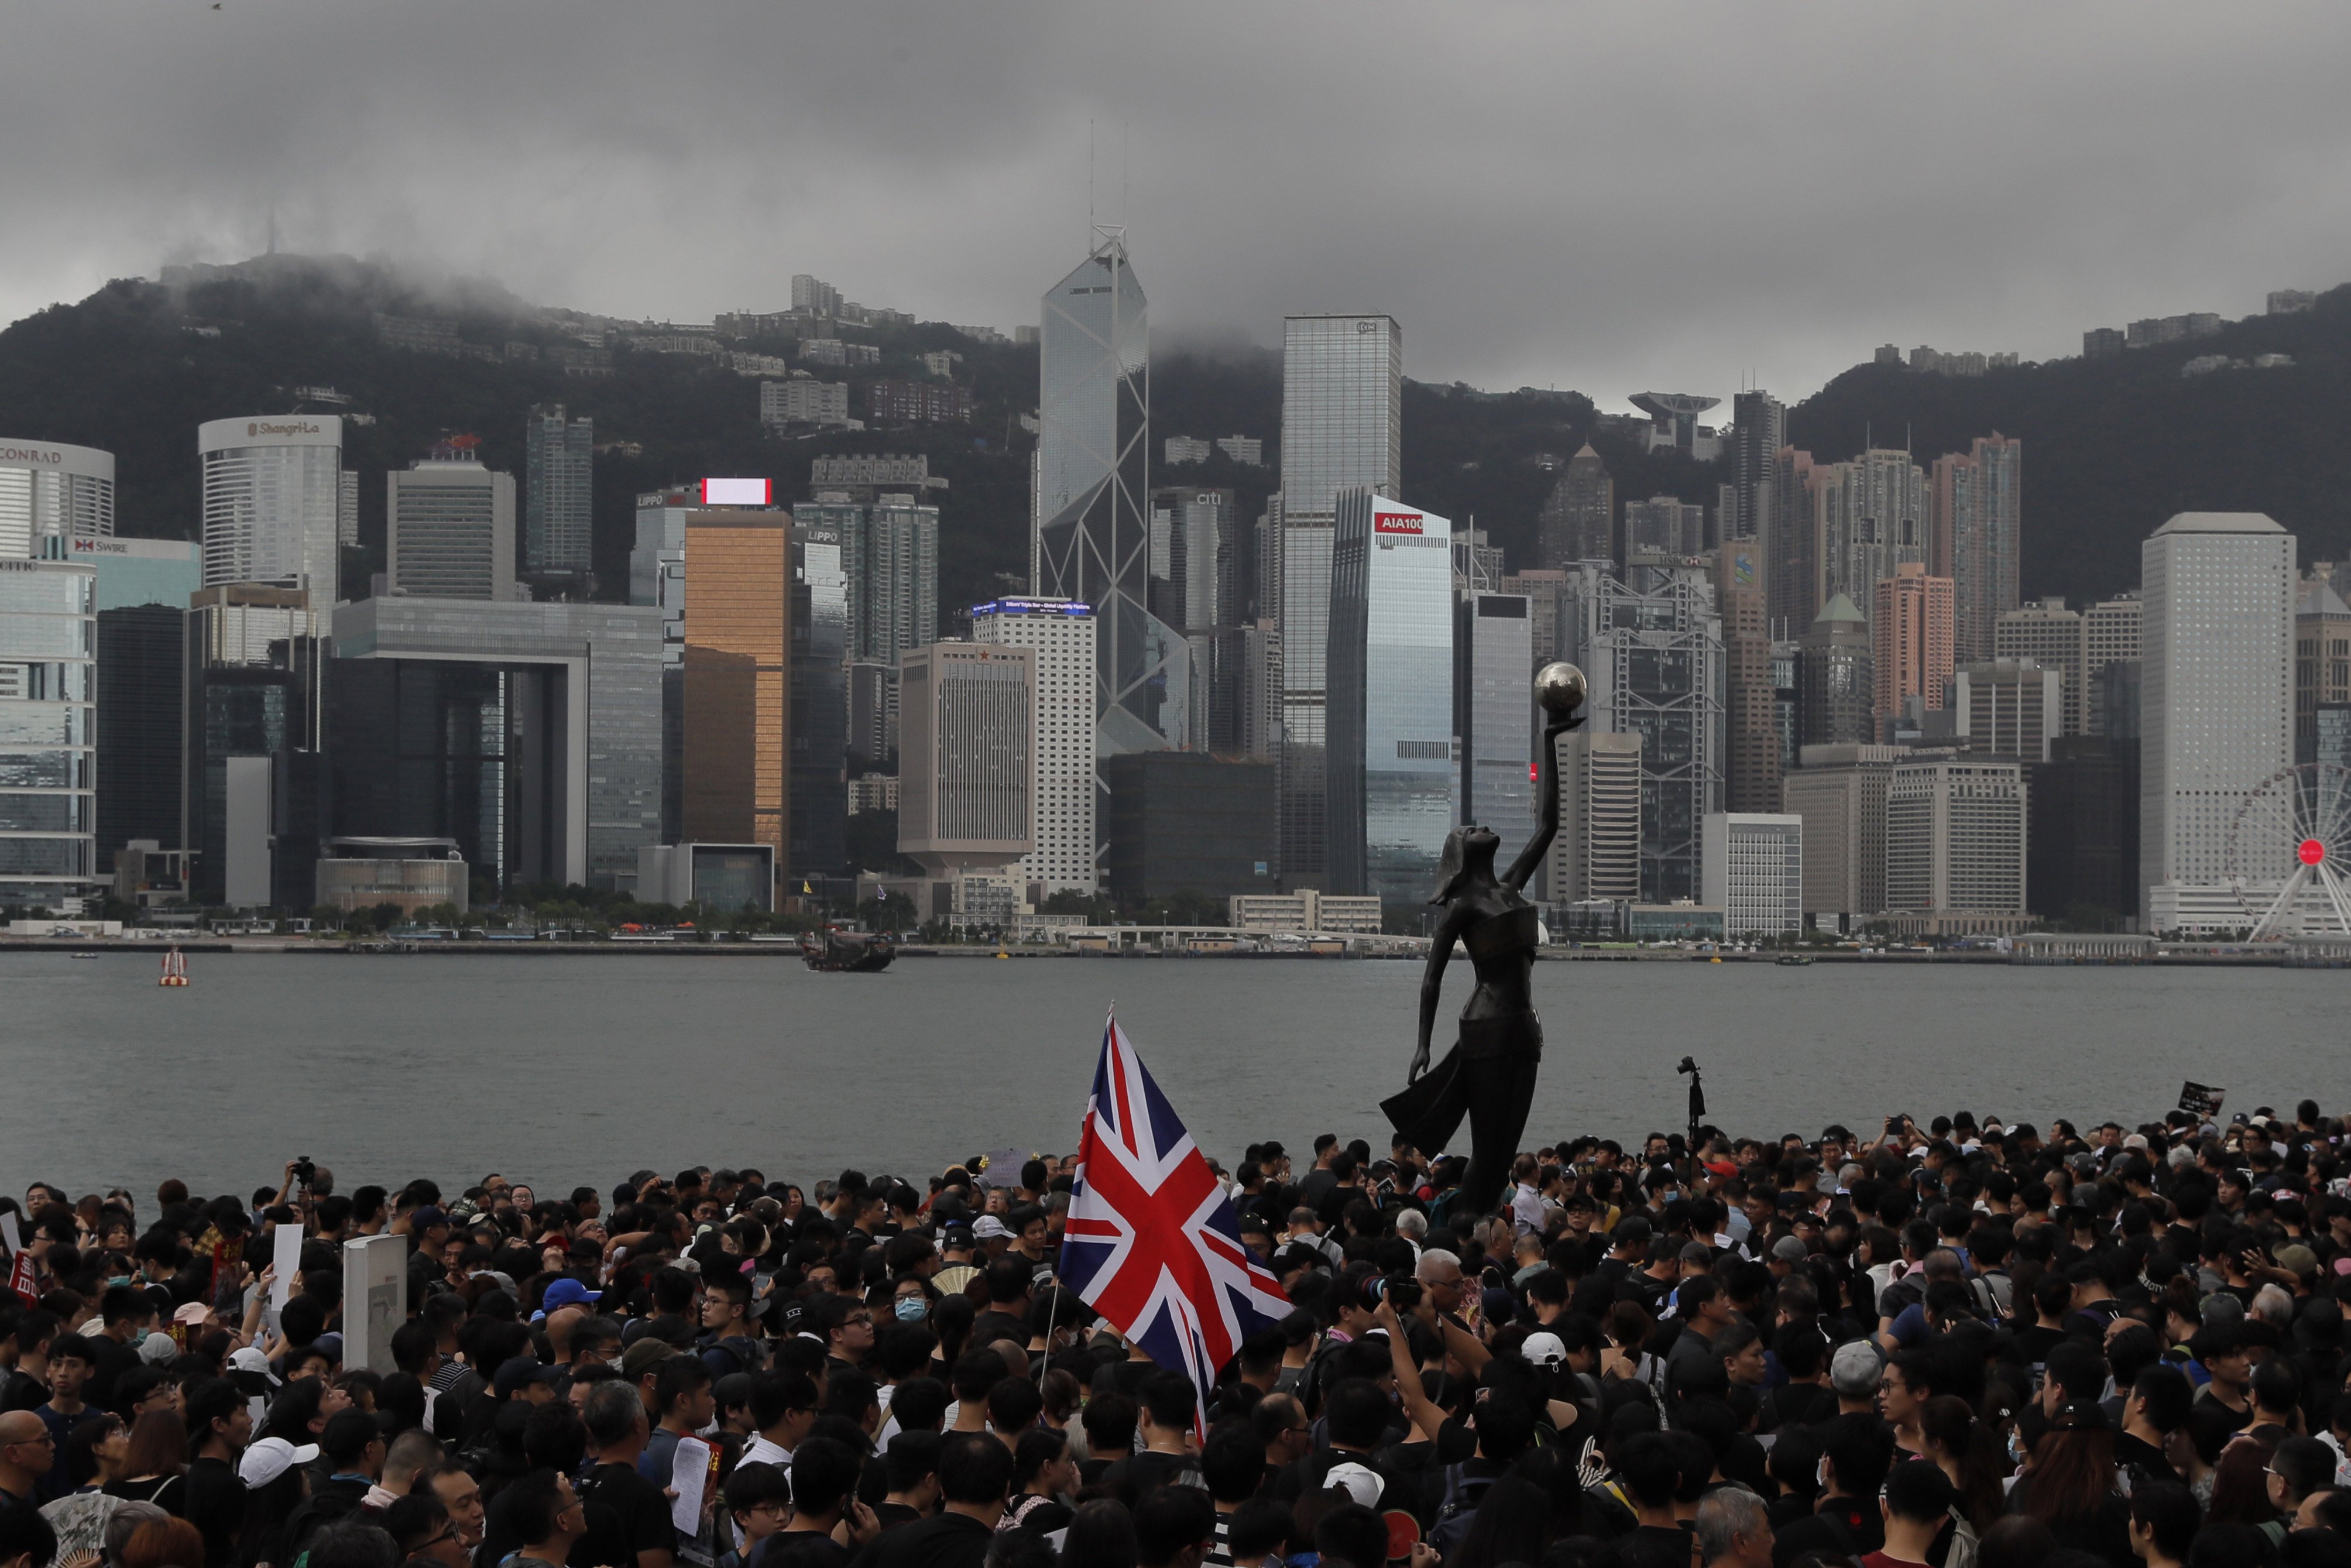 Demonstrators fly the British flag during the Hong Kong protests in 2019. Photo: AP